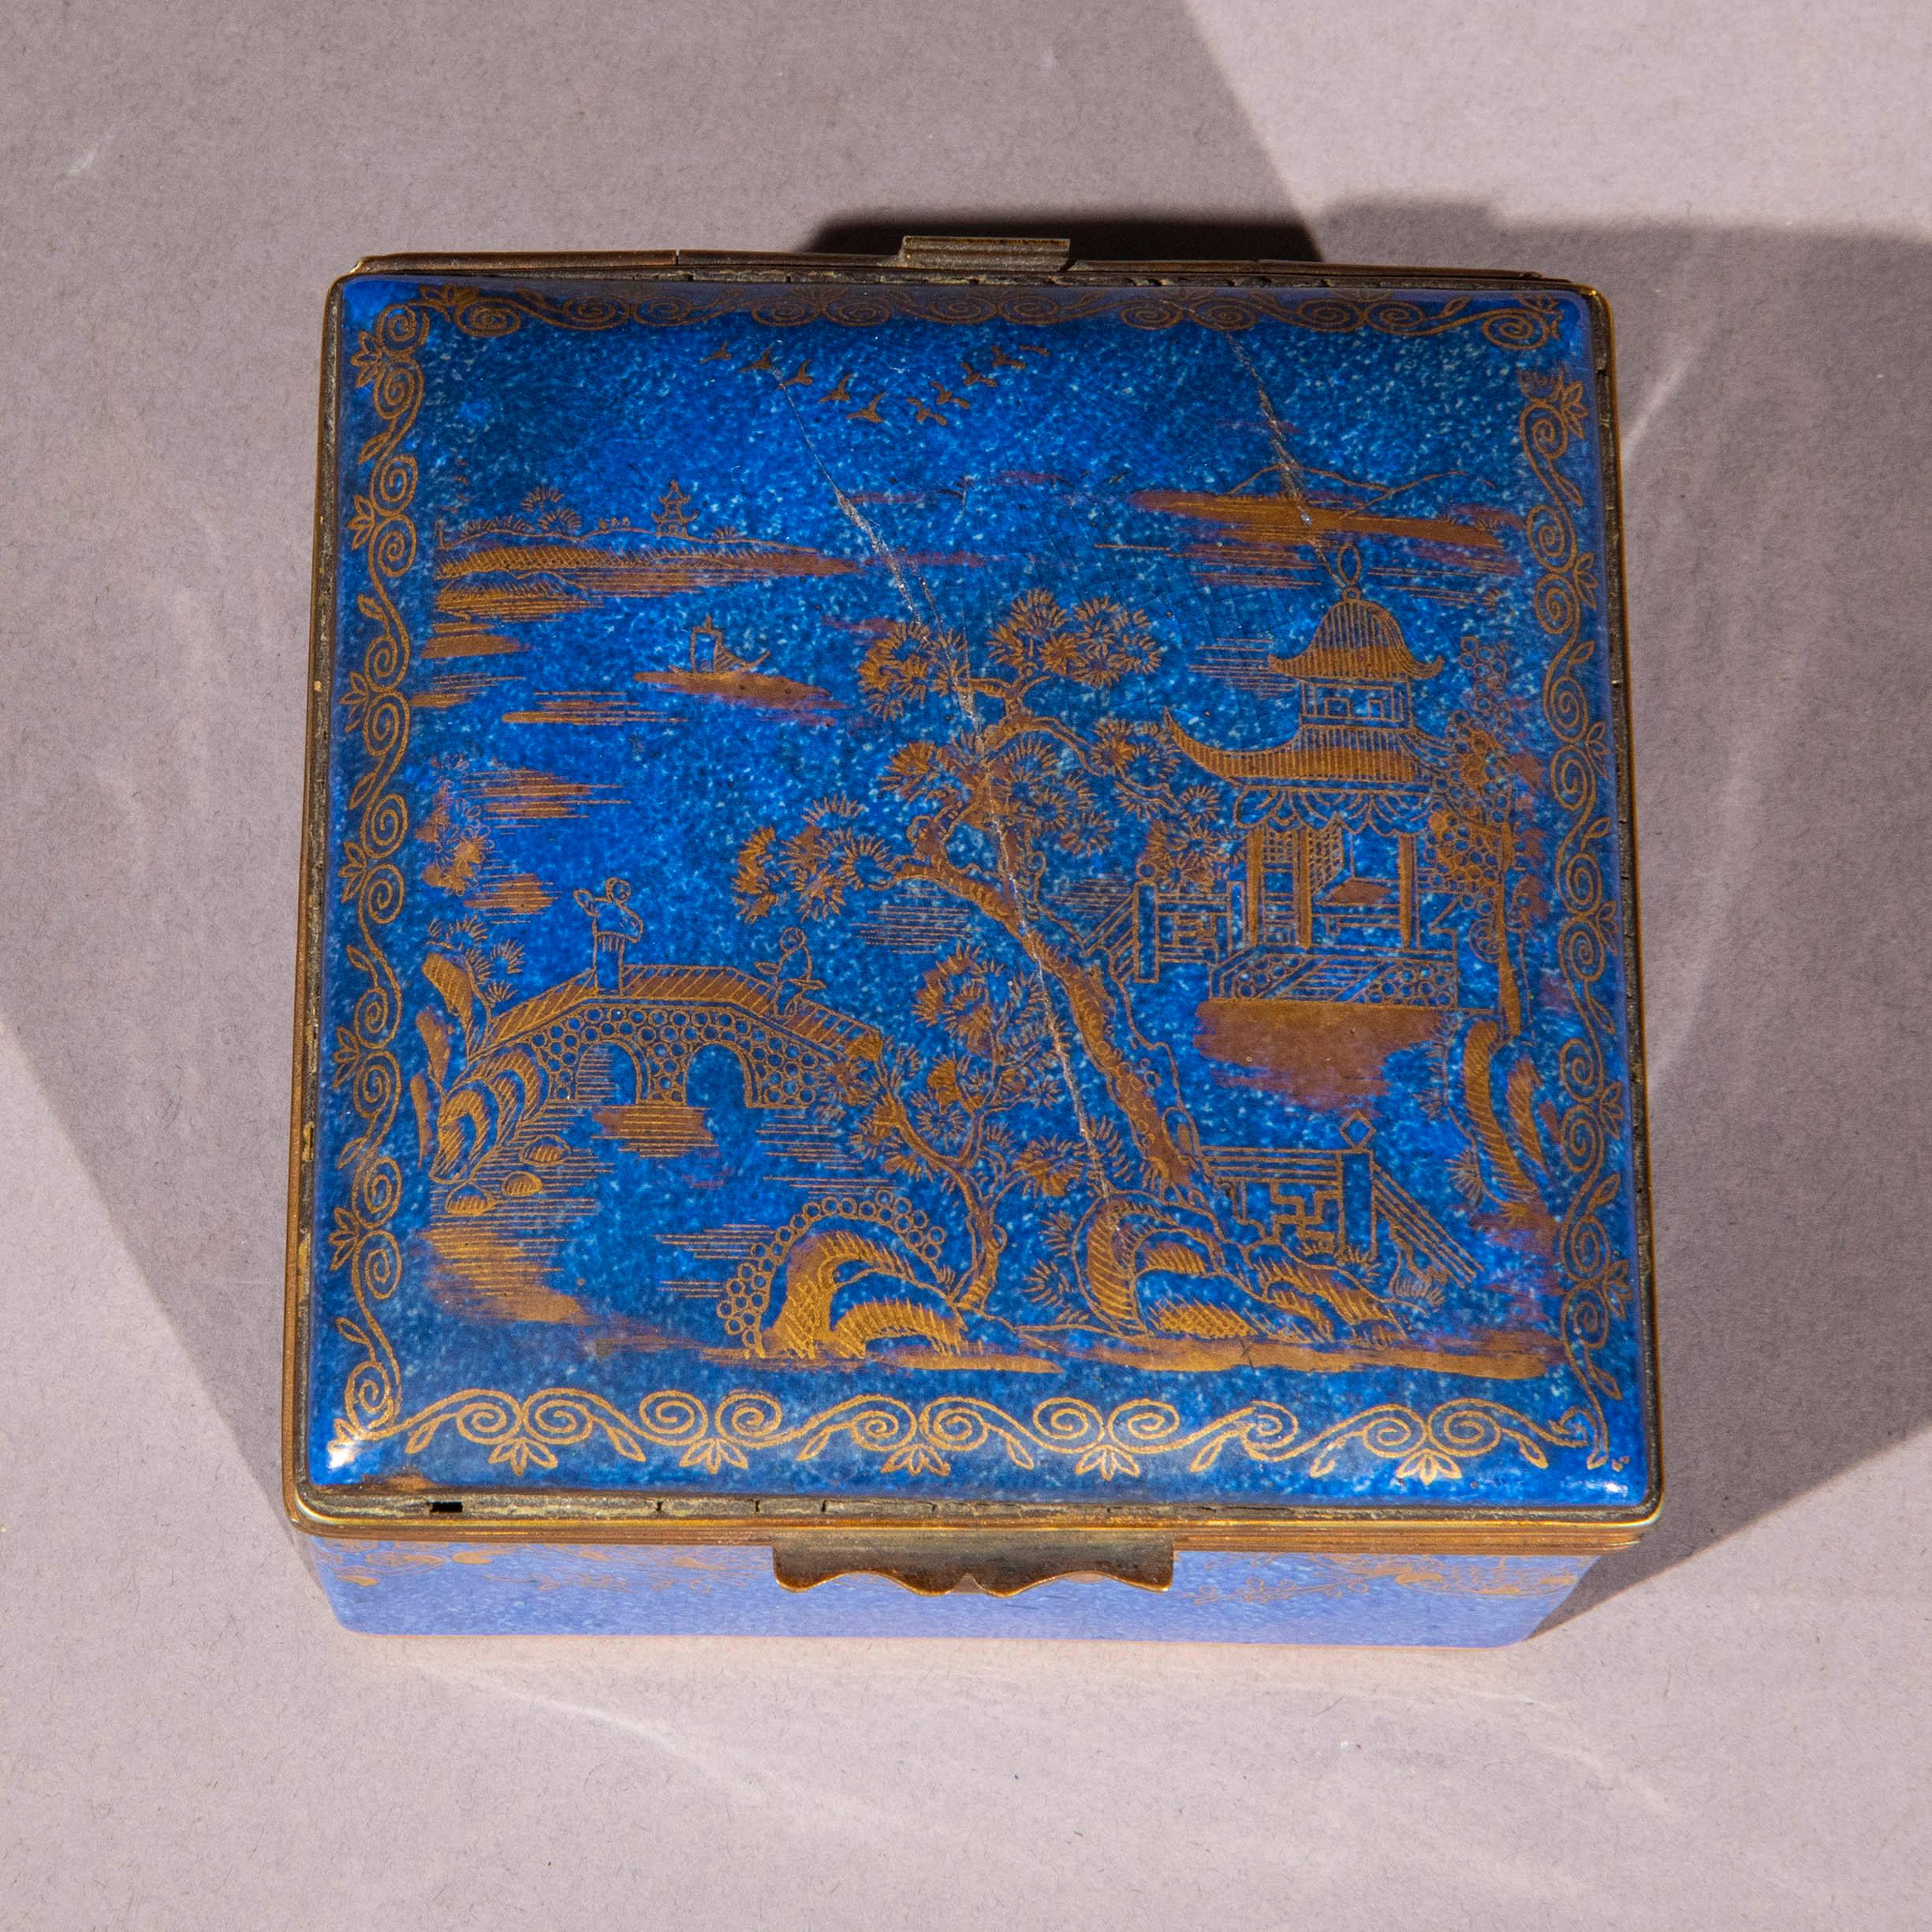 A charming mottled-blue glazed Crown Staffordshire porcelain box in the chinoiserie style
England, circa 1900–1920.

Why we like it
The deep, mottled ‘powder blue’ colour of this charming box, decorated with exotic Oriental designs in gold, is